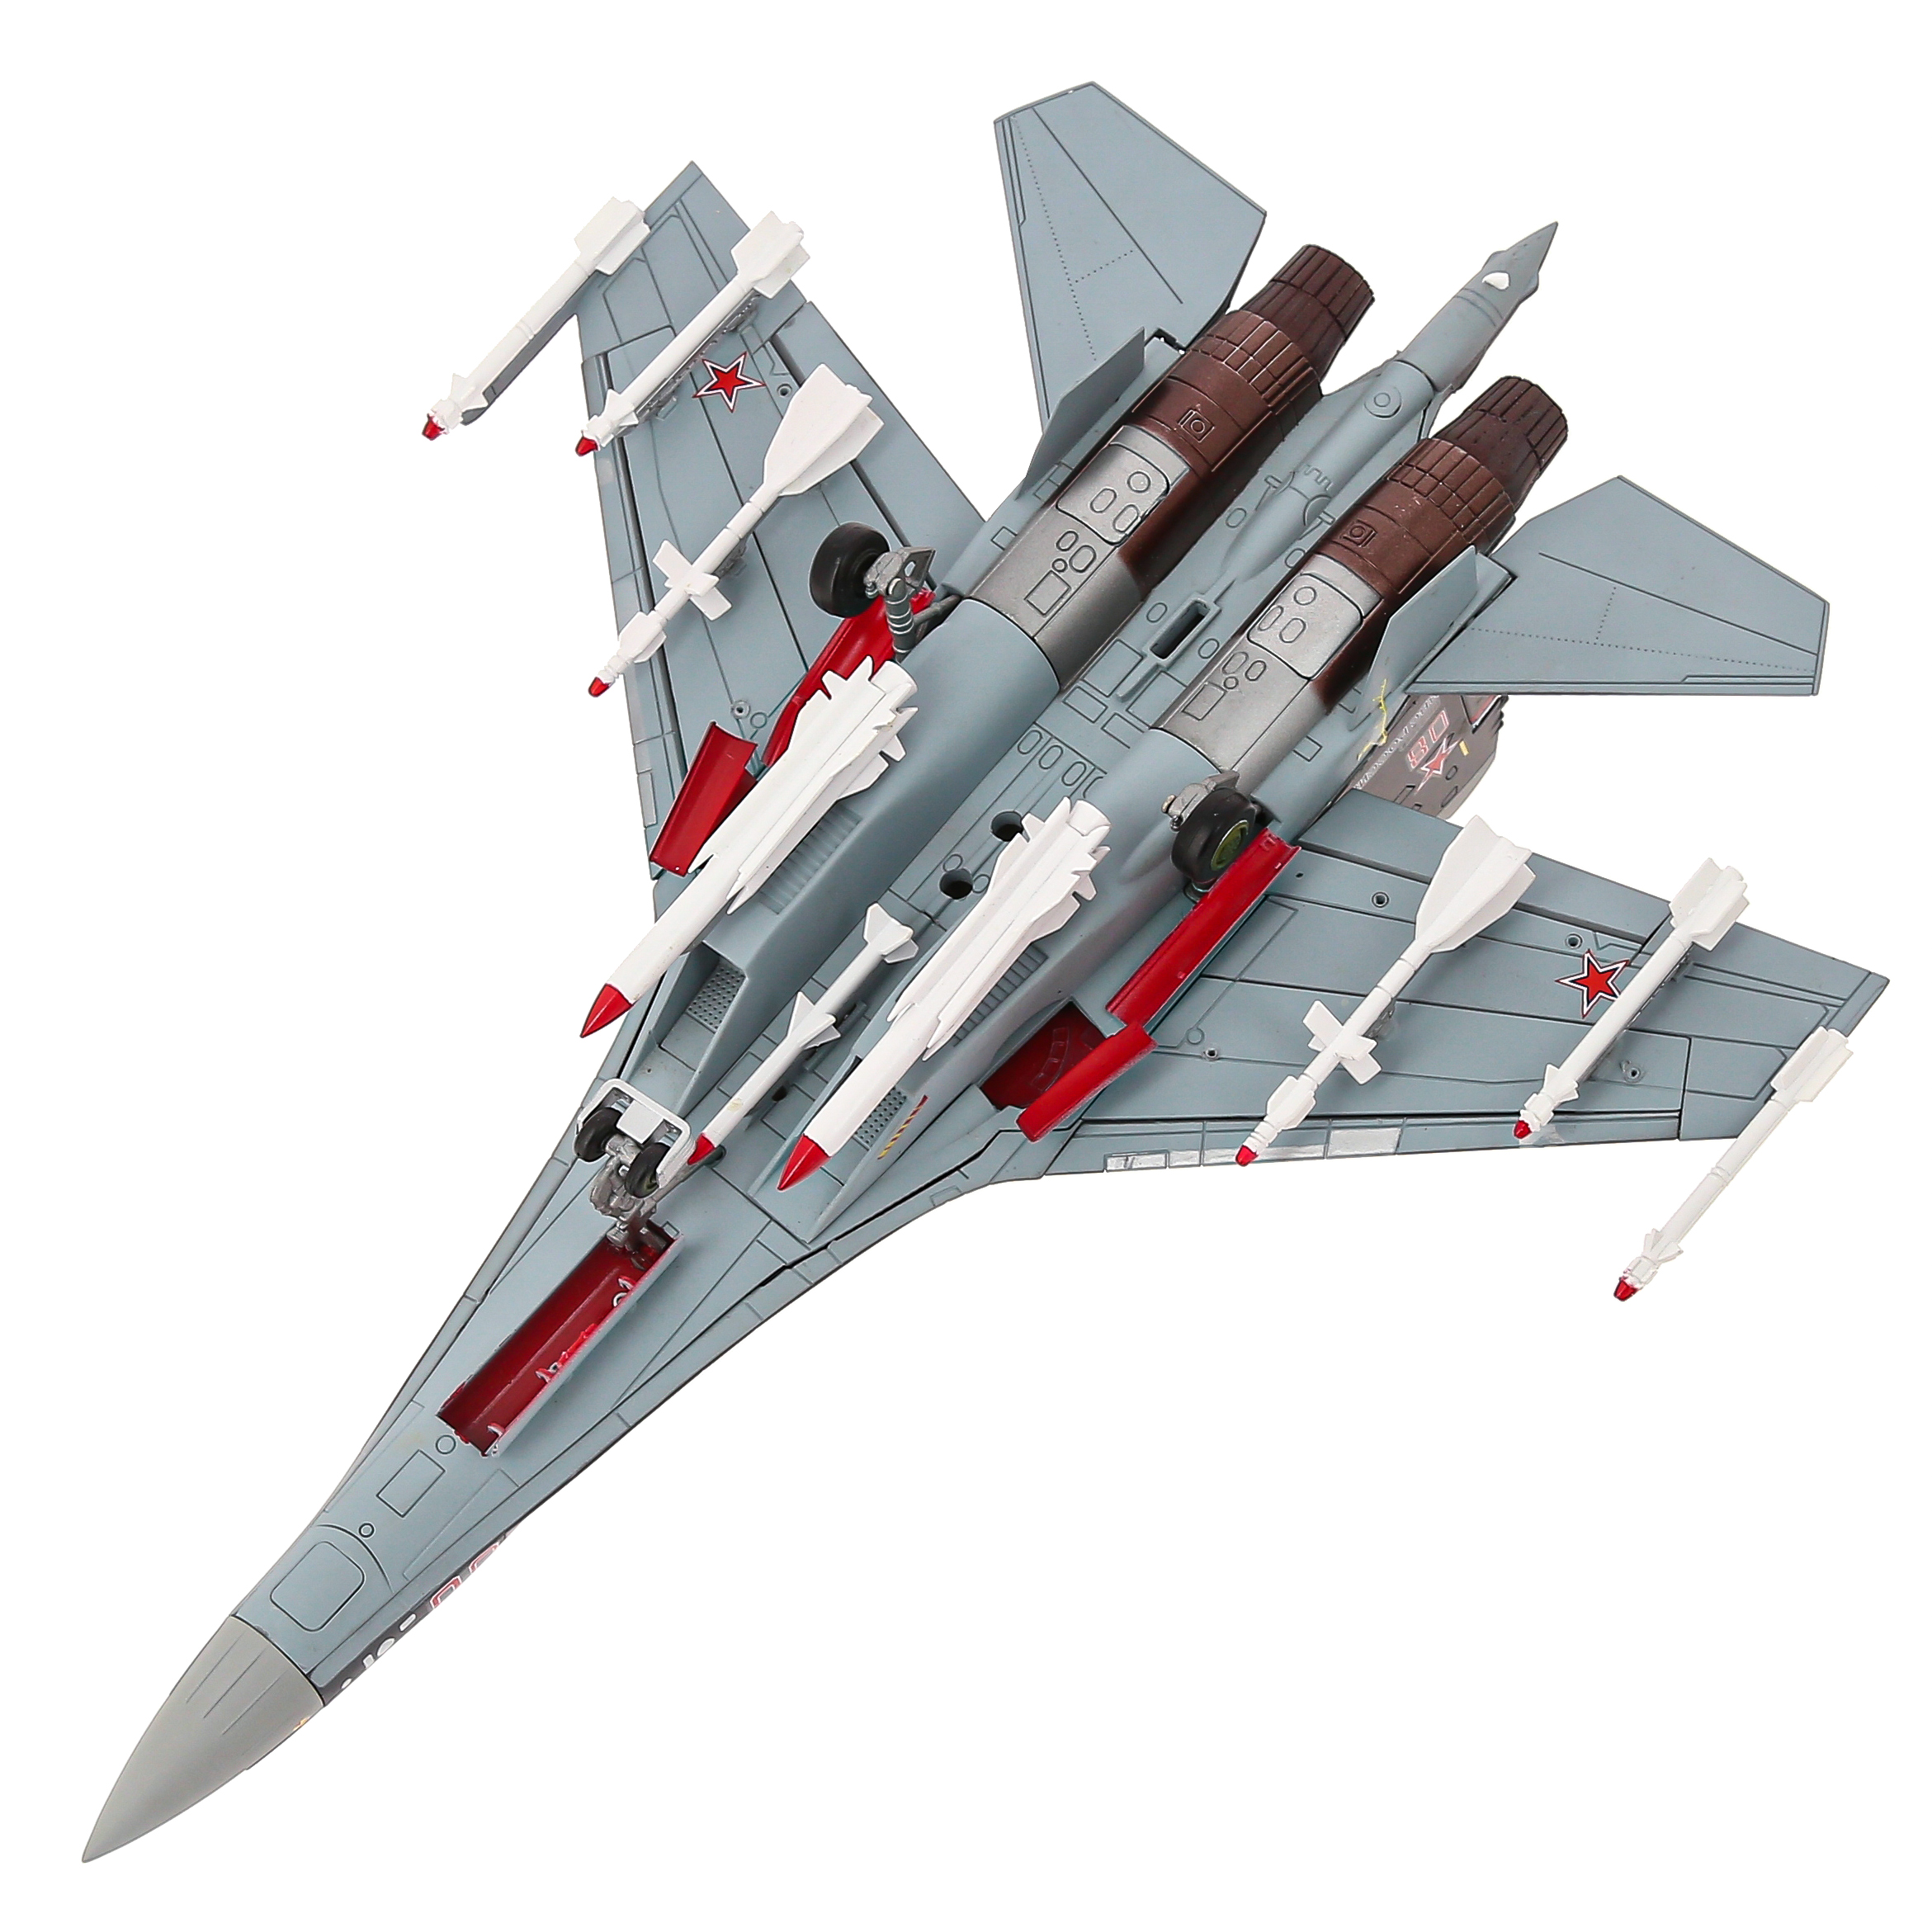    -35,  1:72 ,   32 . The model of the Russian Su-35 fighter, scale 1:72 metal, the length of the model is 32 cm. # 3 hobbyplus.ru